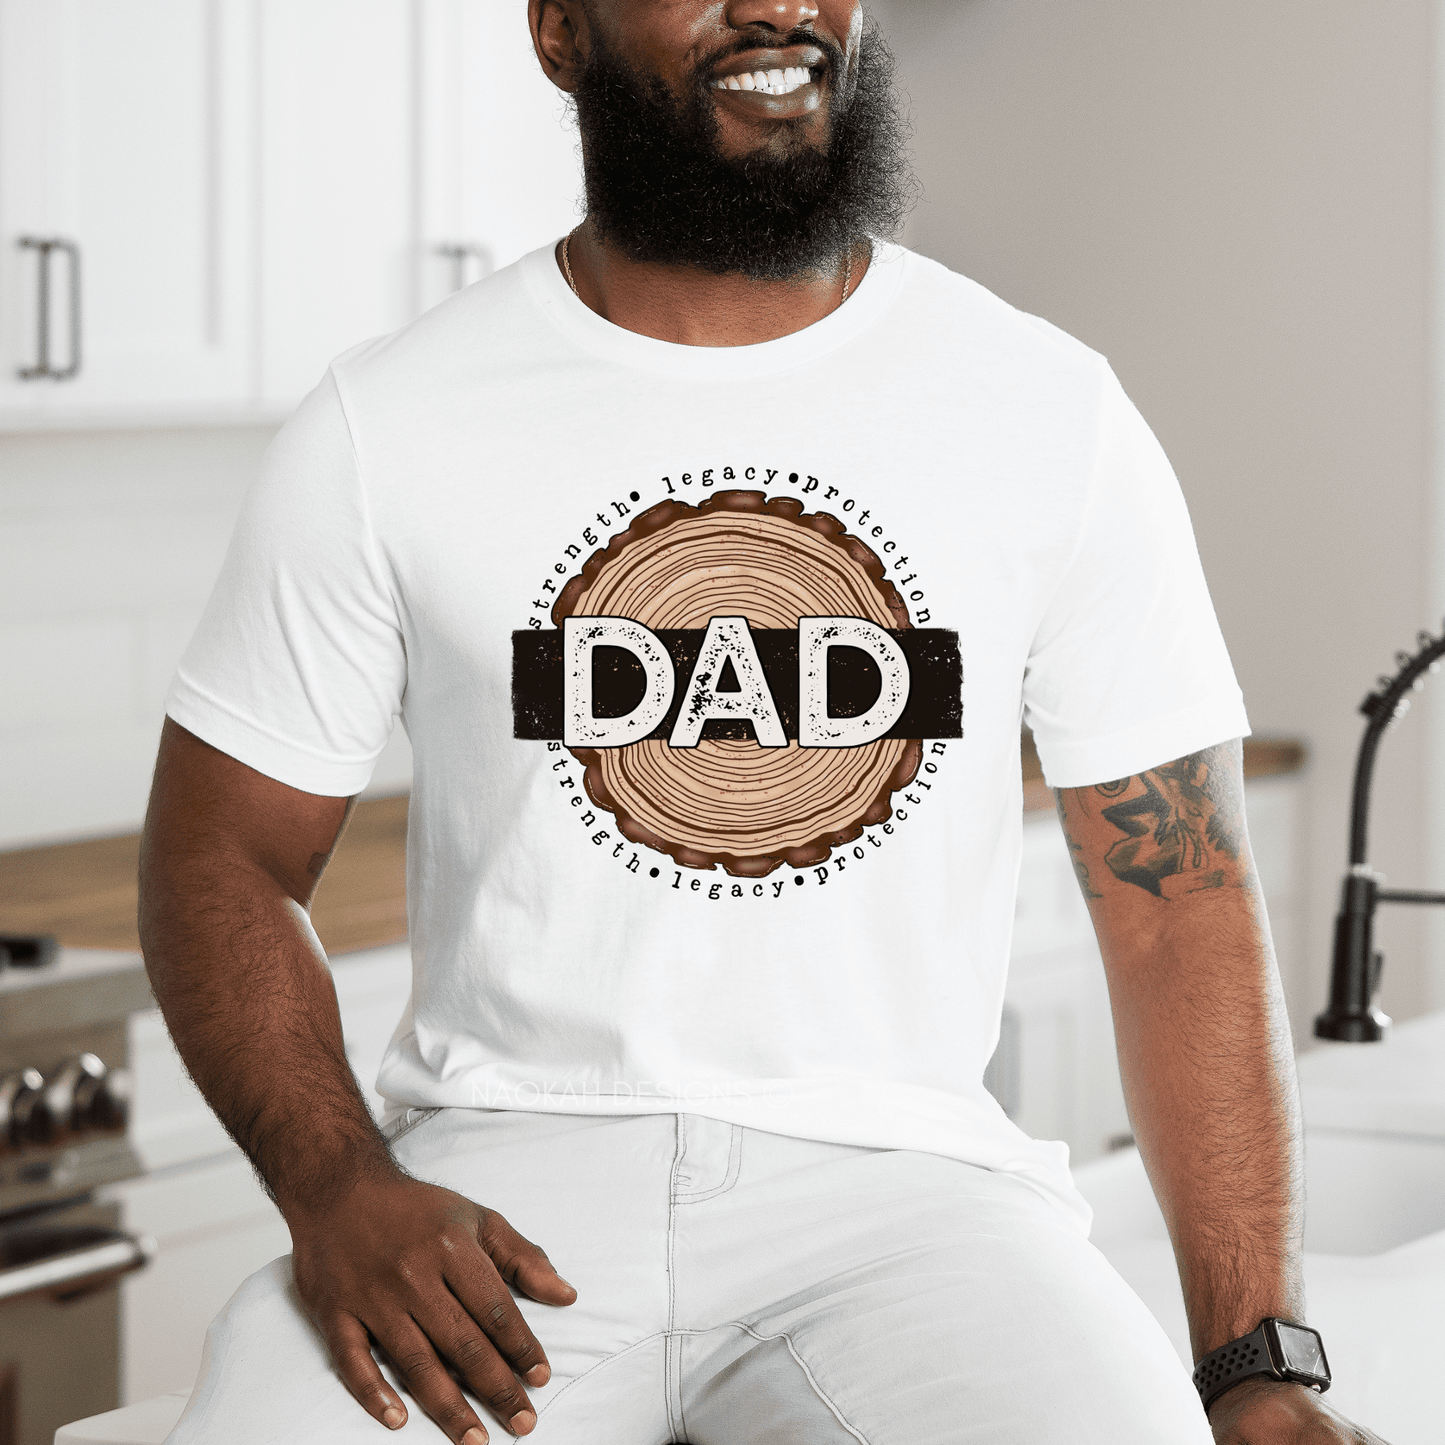 dad shirt, best dad ever shirt, fathers day gift shirt, fathers day gift, new dad shirt, father's day shirt, best dad t-shirt, best dad gift, dad shirt